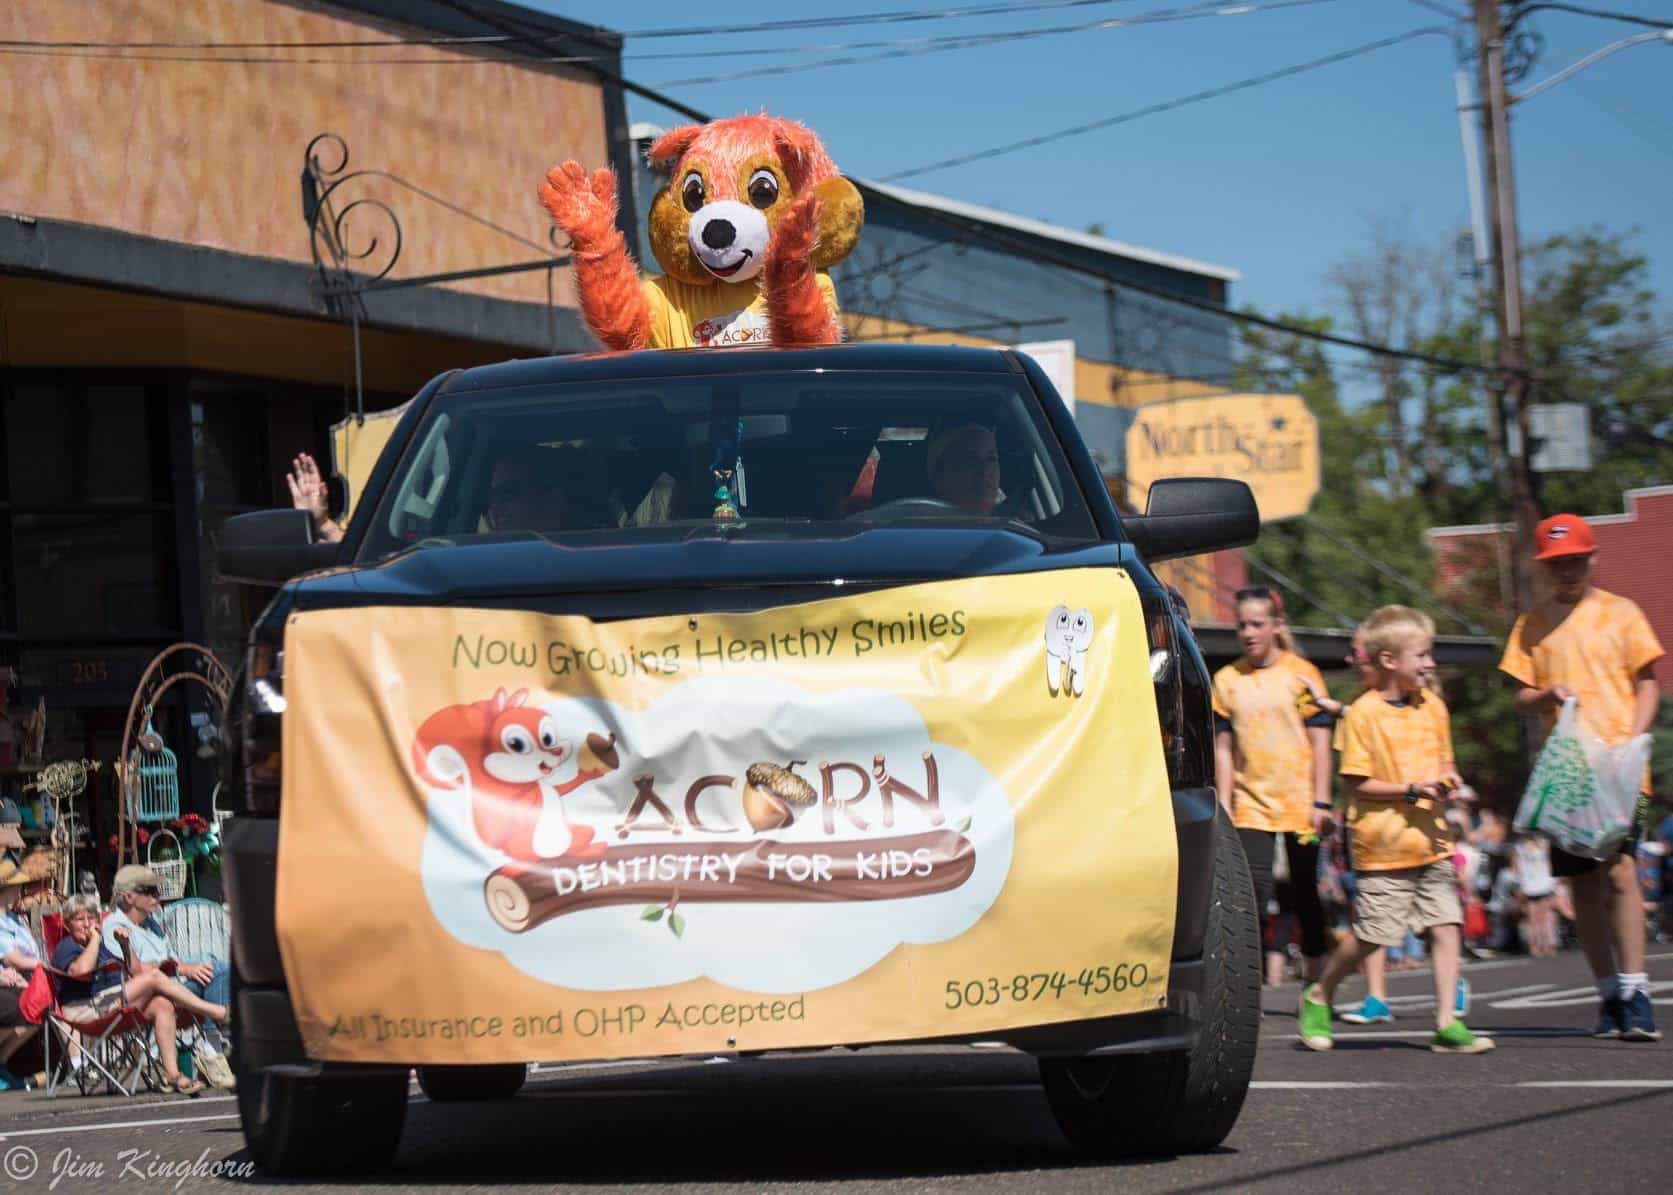 mascot in the back of a truck, promotional banner in the front